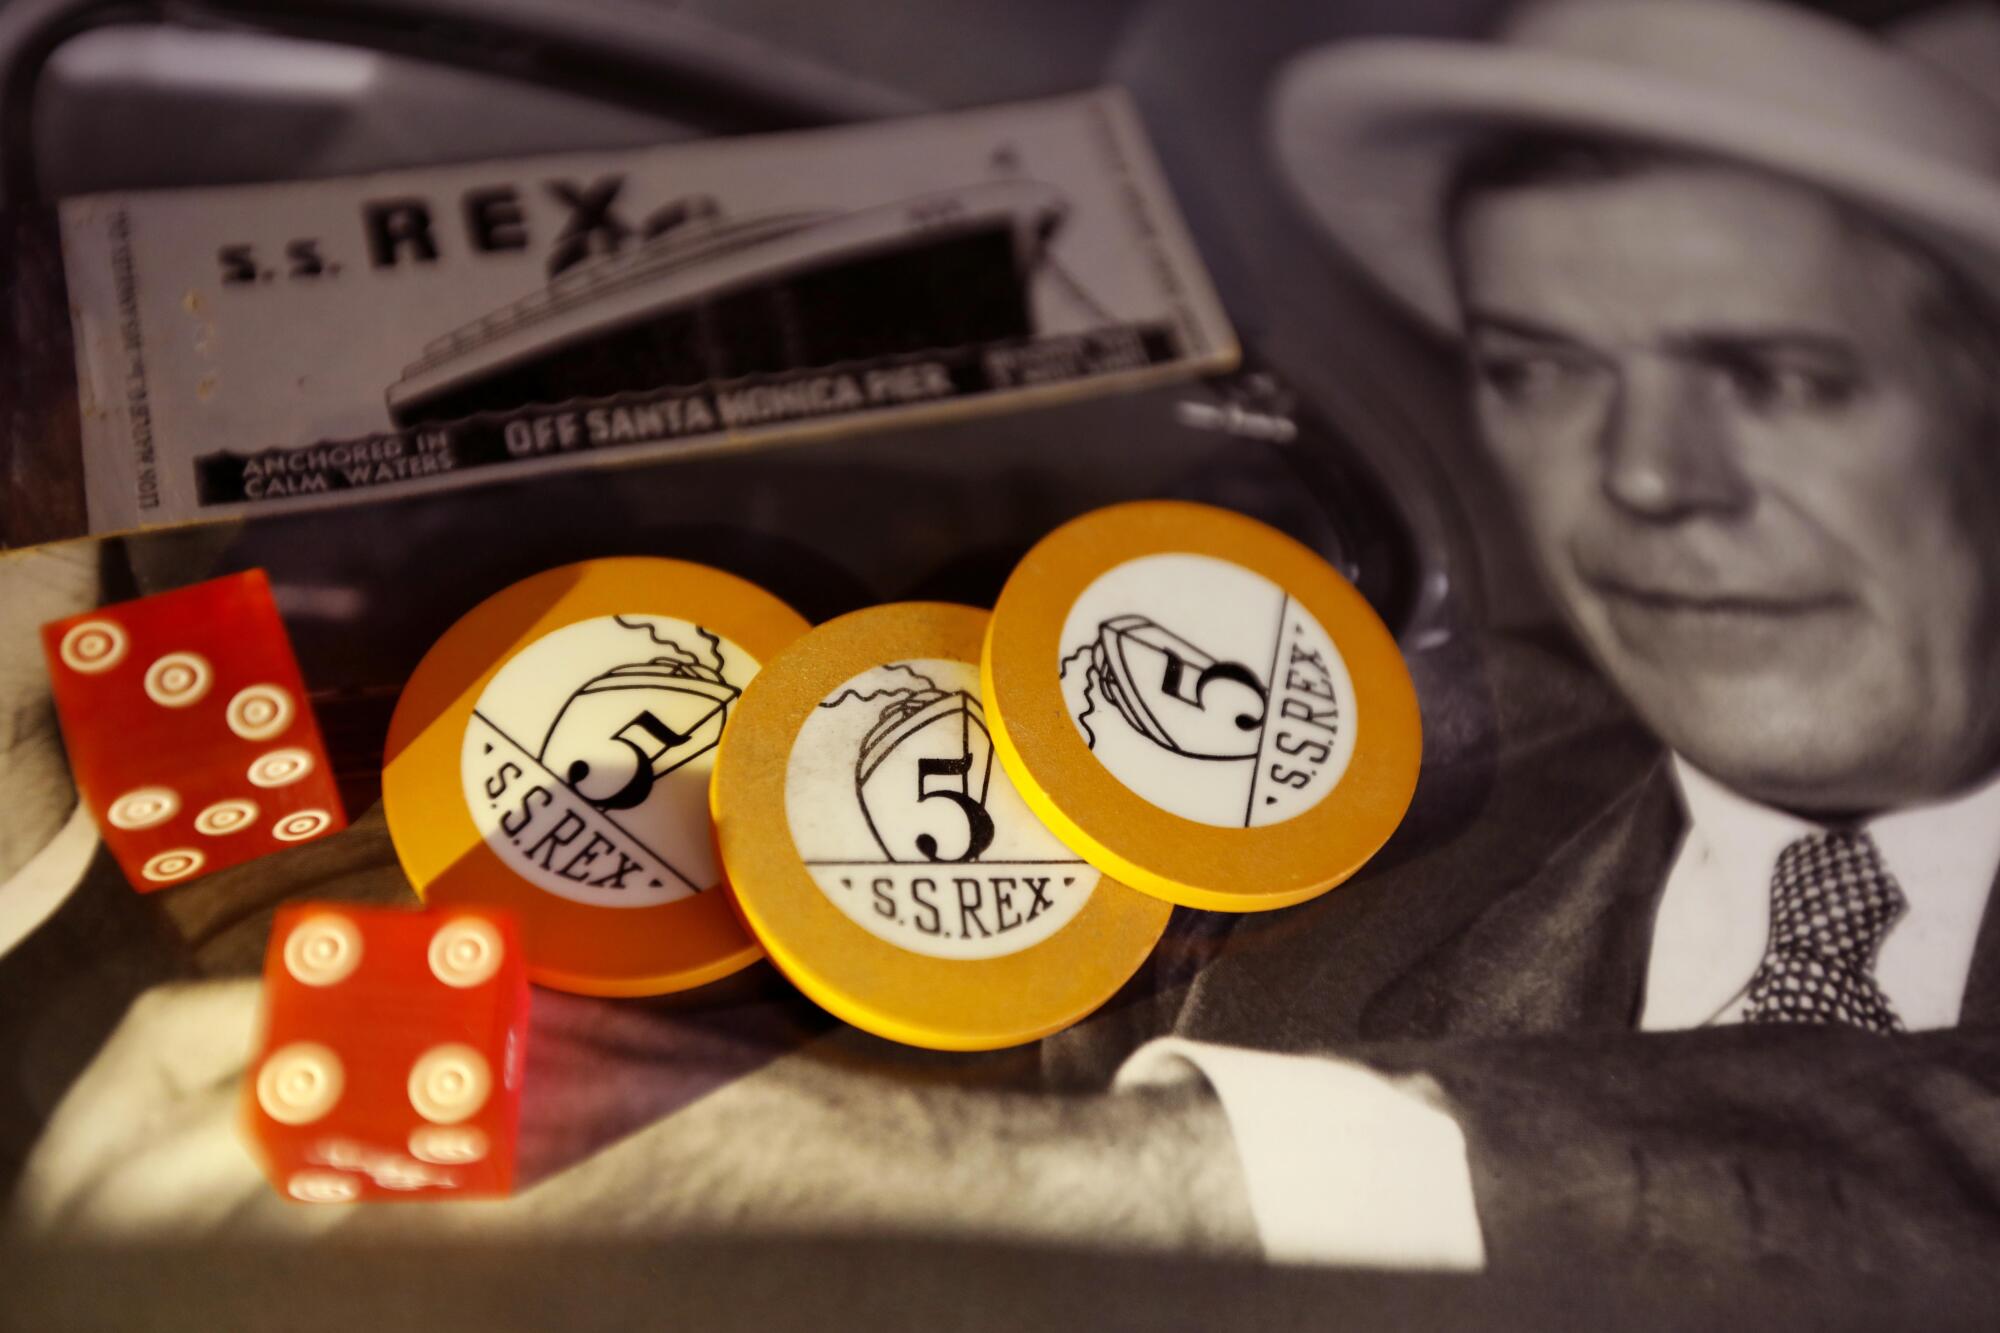 Artifacts from the S.S. Rex — gaming chips, dice and a matchbook — rest on a photograph of Tony Cornero.